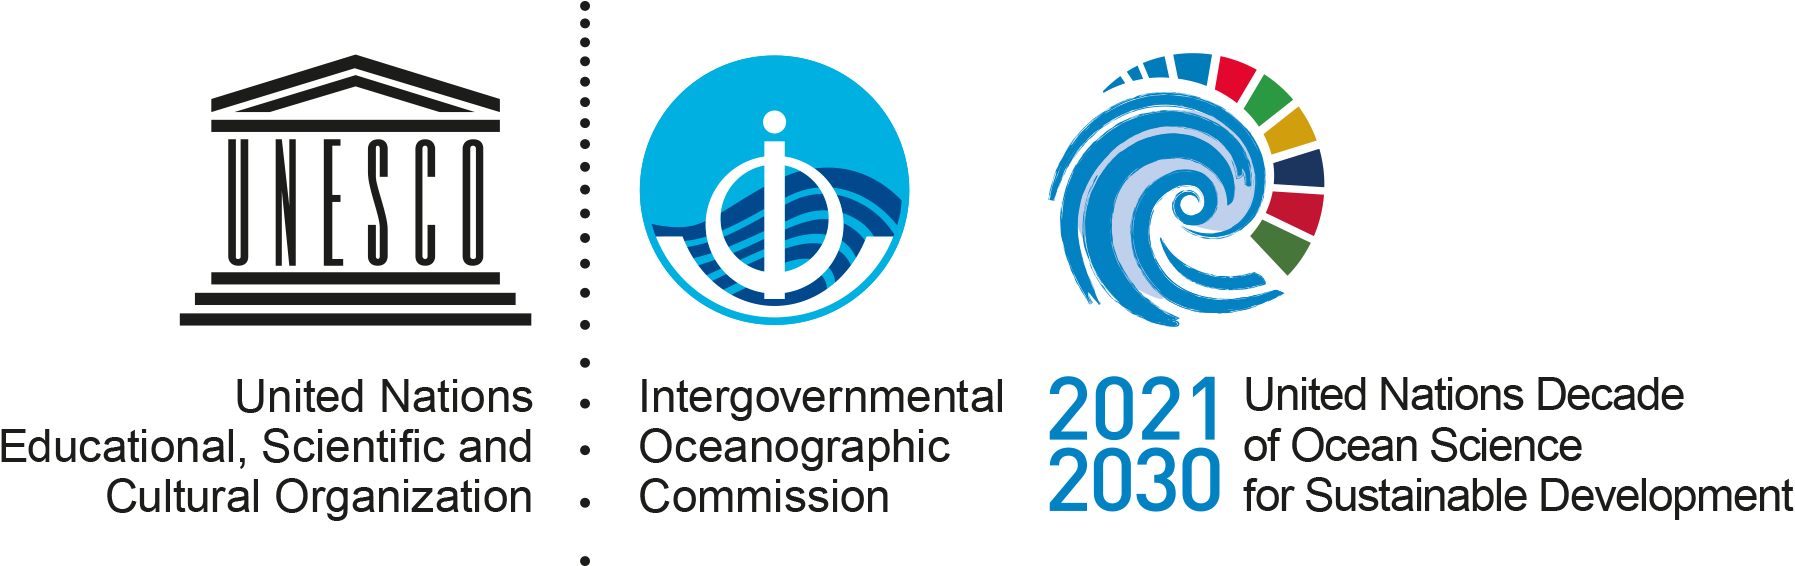 UN Decade of Ocean Science for Sustainable Development (2021-2030)